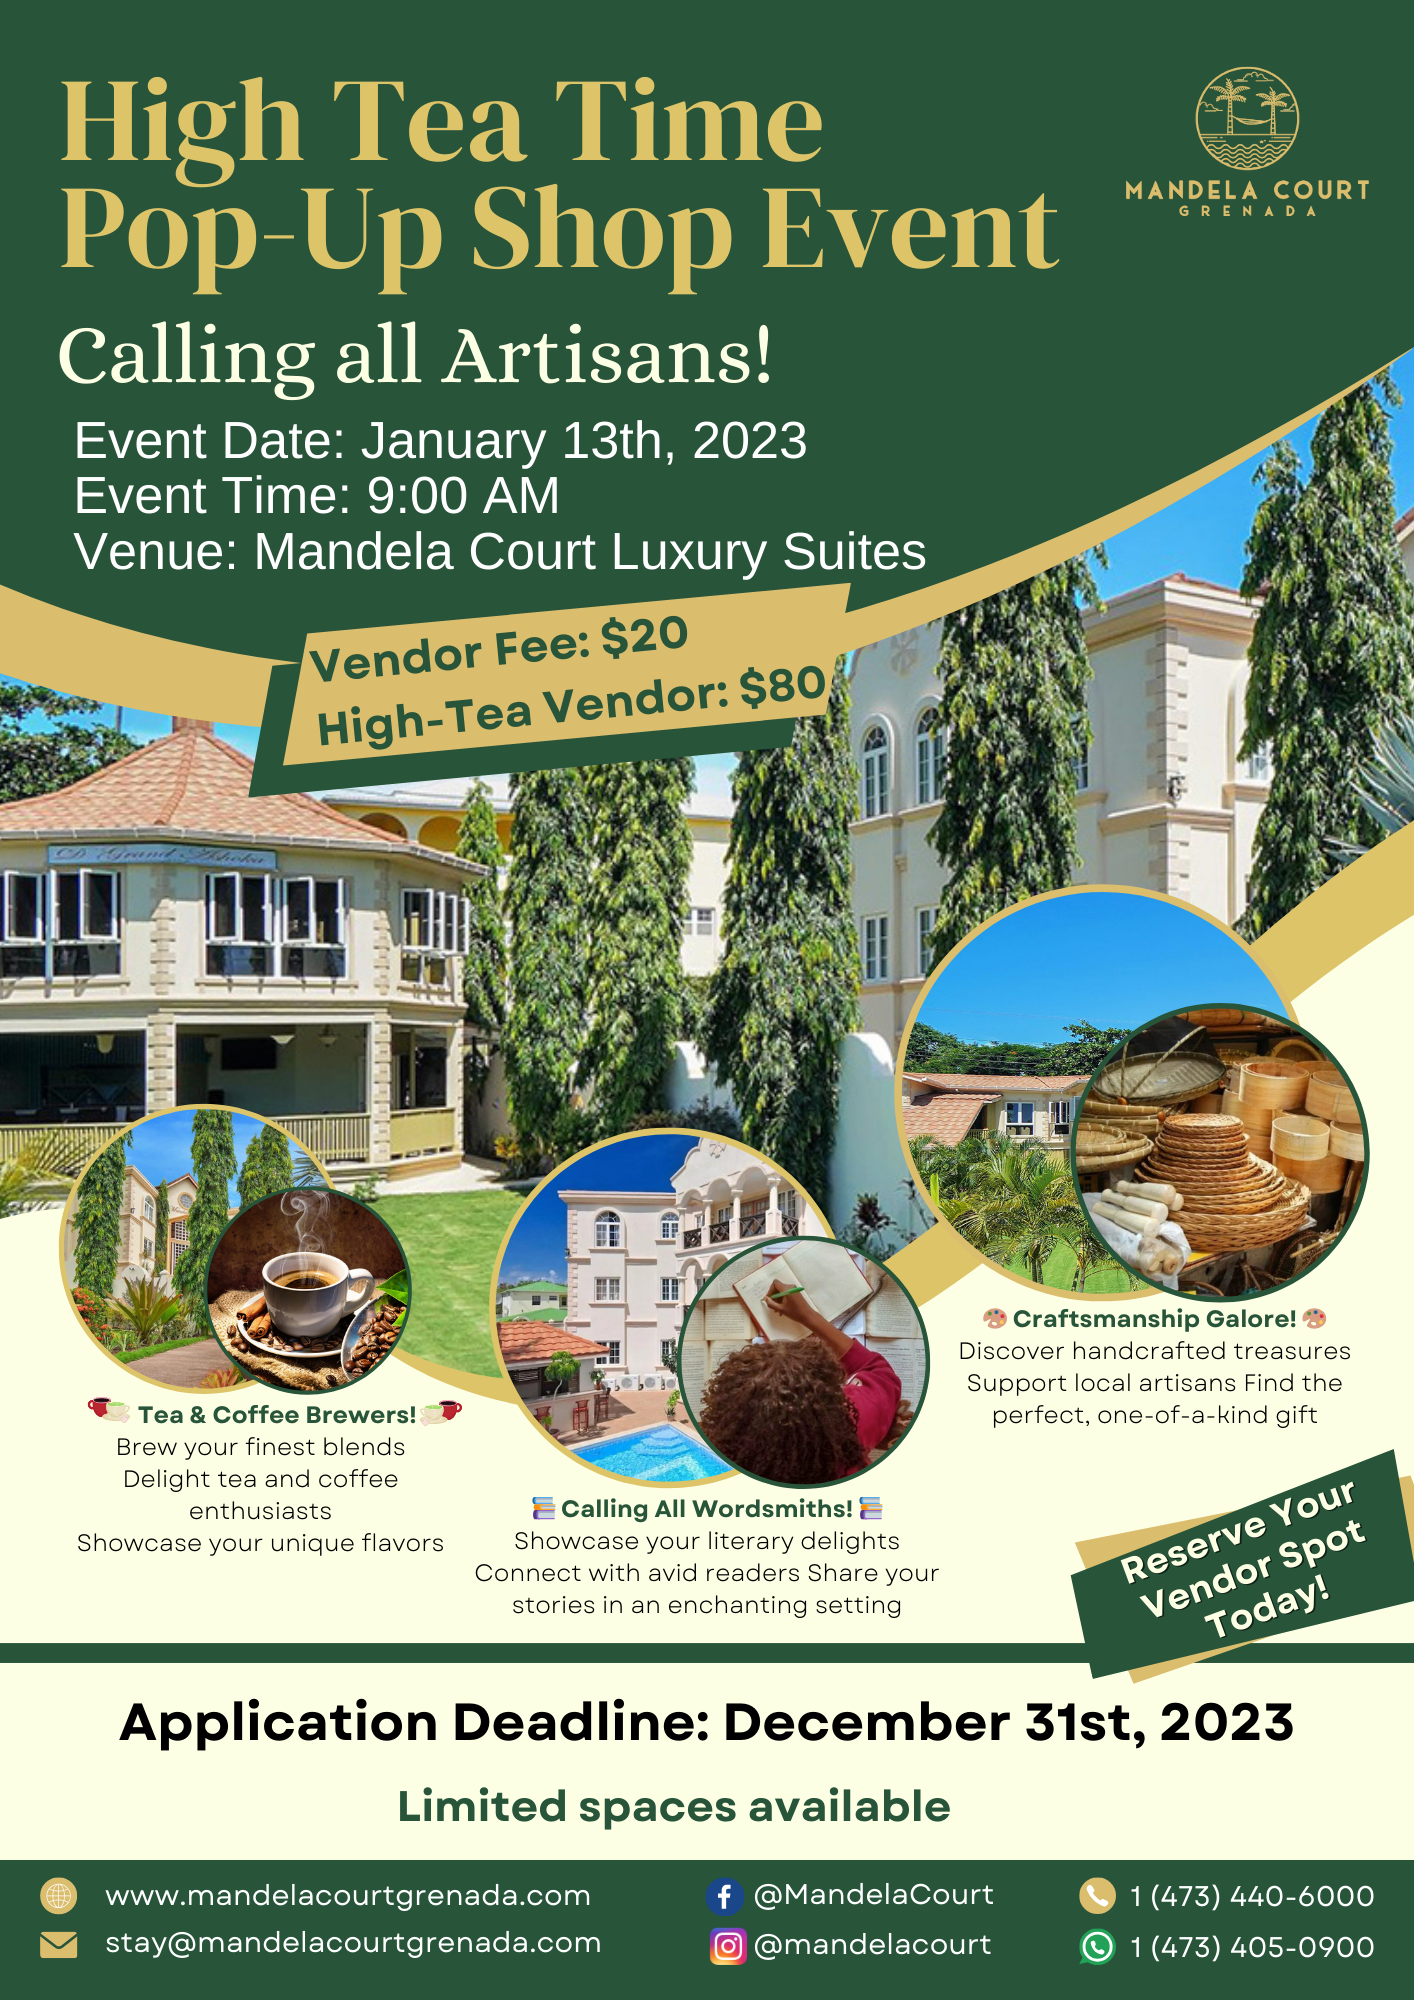 Invitation to Vendors: Join High Tea Time at Mandela Court Luxury Suites